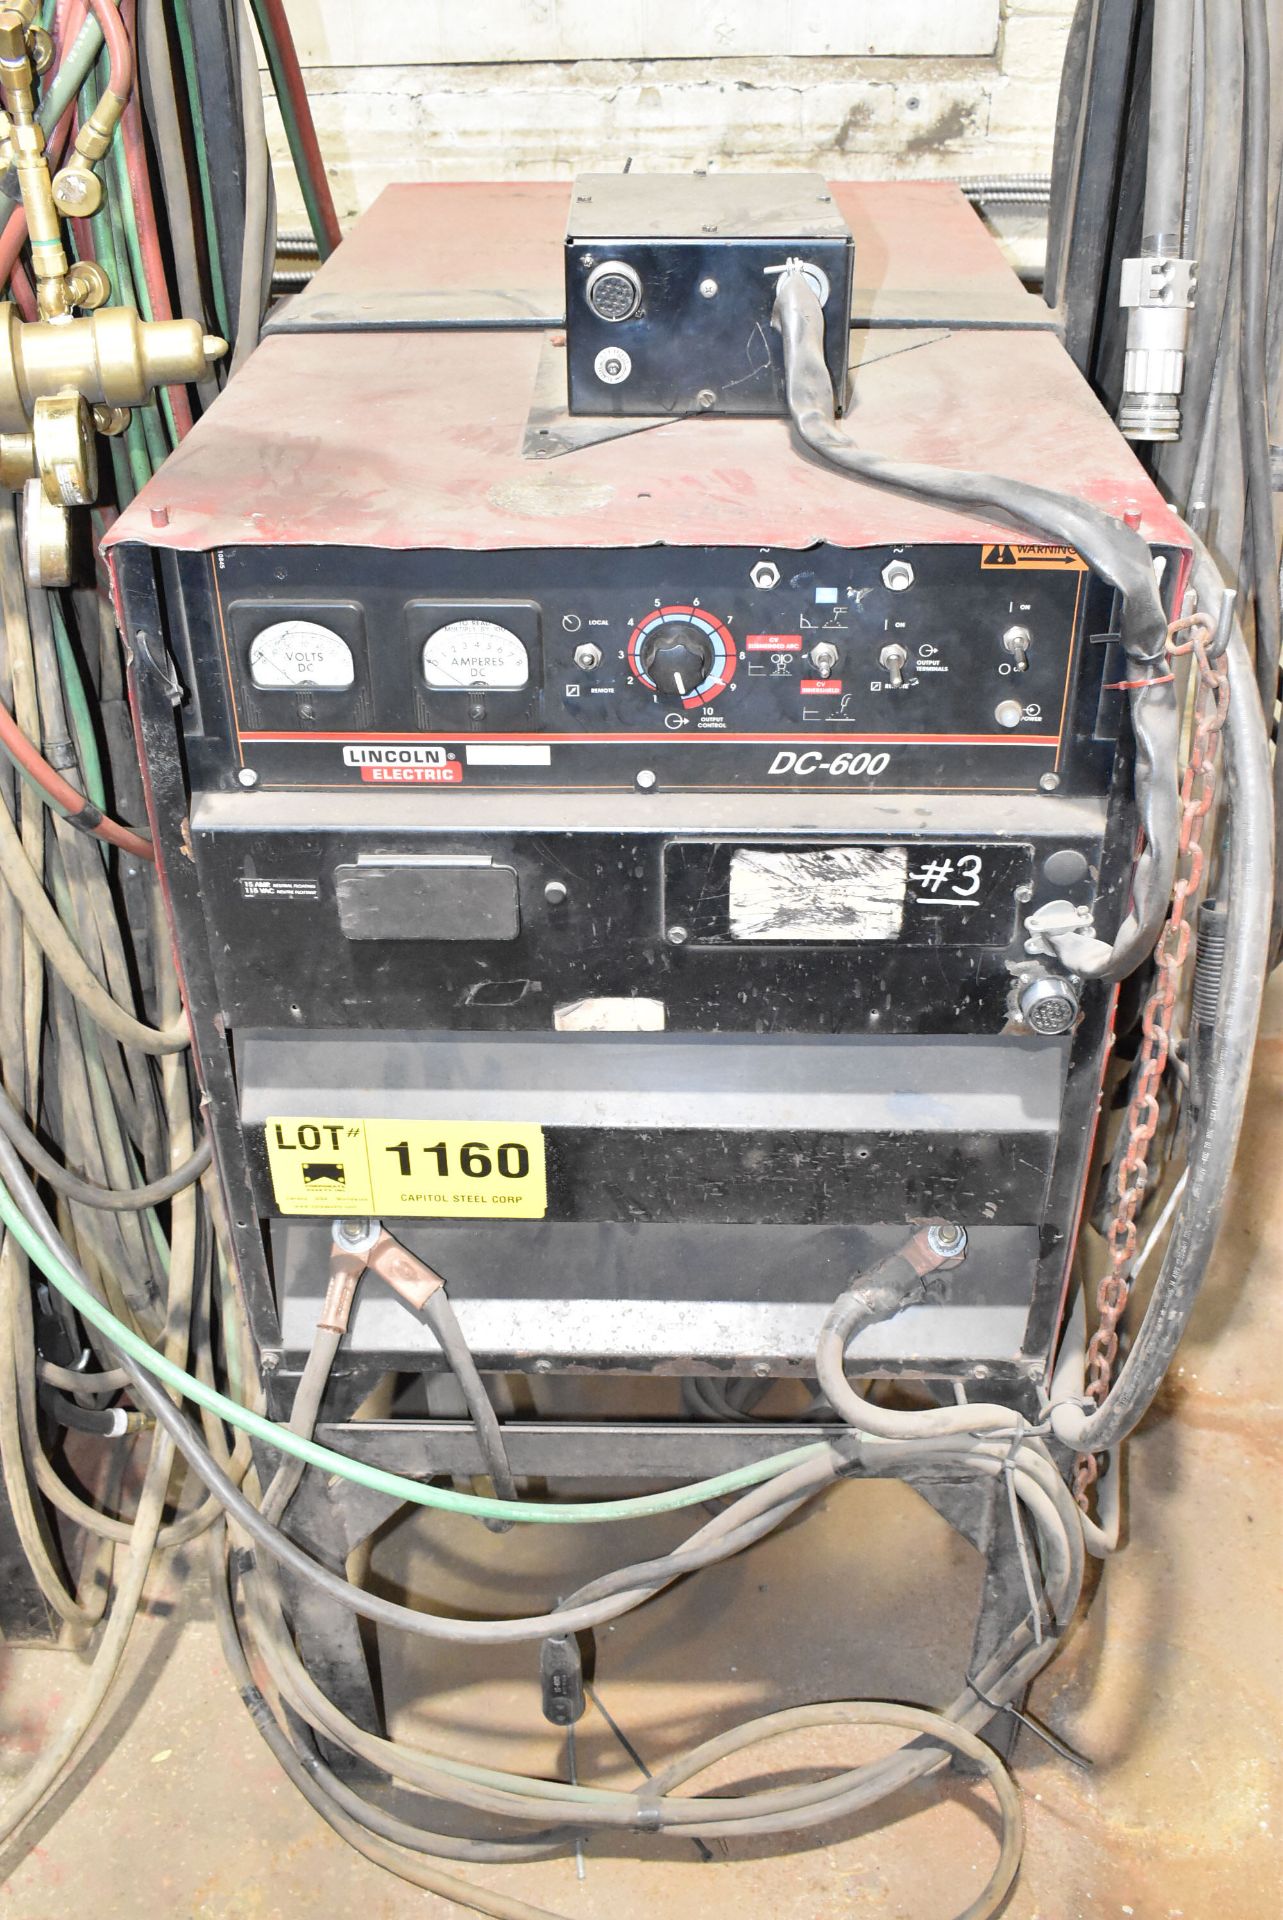 LINCOLN ELECTRIC DC-600 MIG WELDER WITH LINCOLN ELECTRIC LF-74 WIRE FEEDER, CABLES & GUN, S/N: N/ - Image 2 of 8